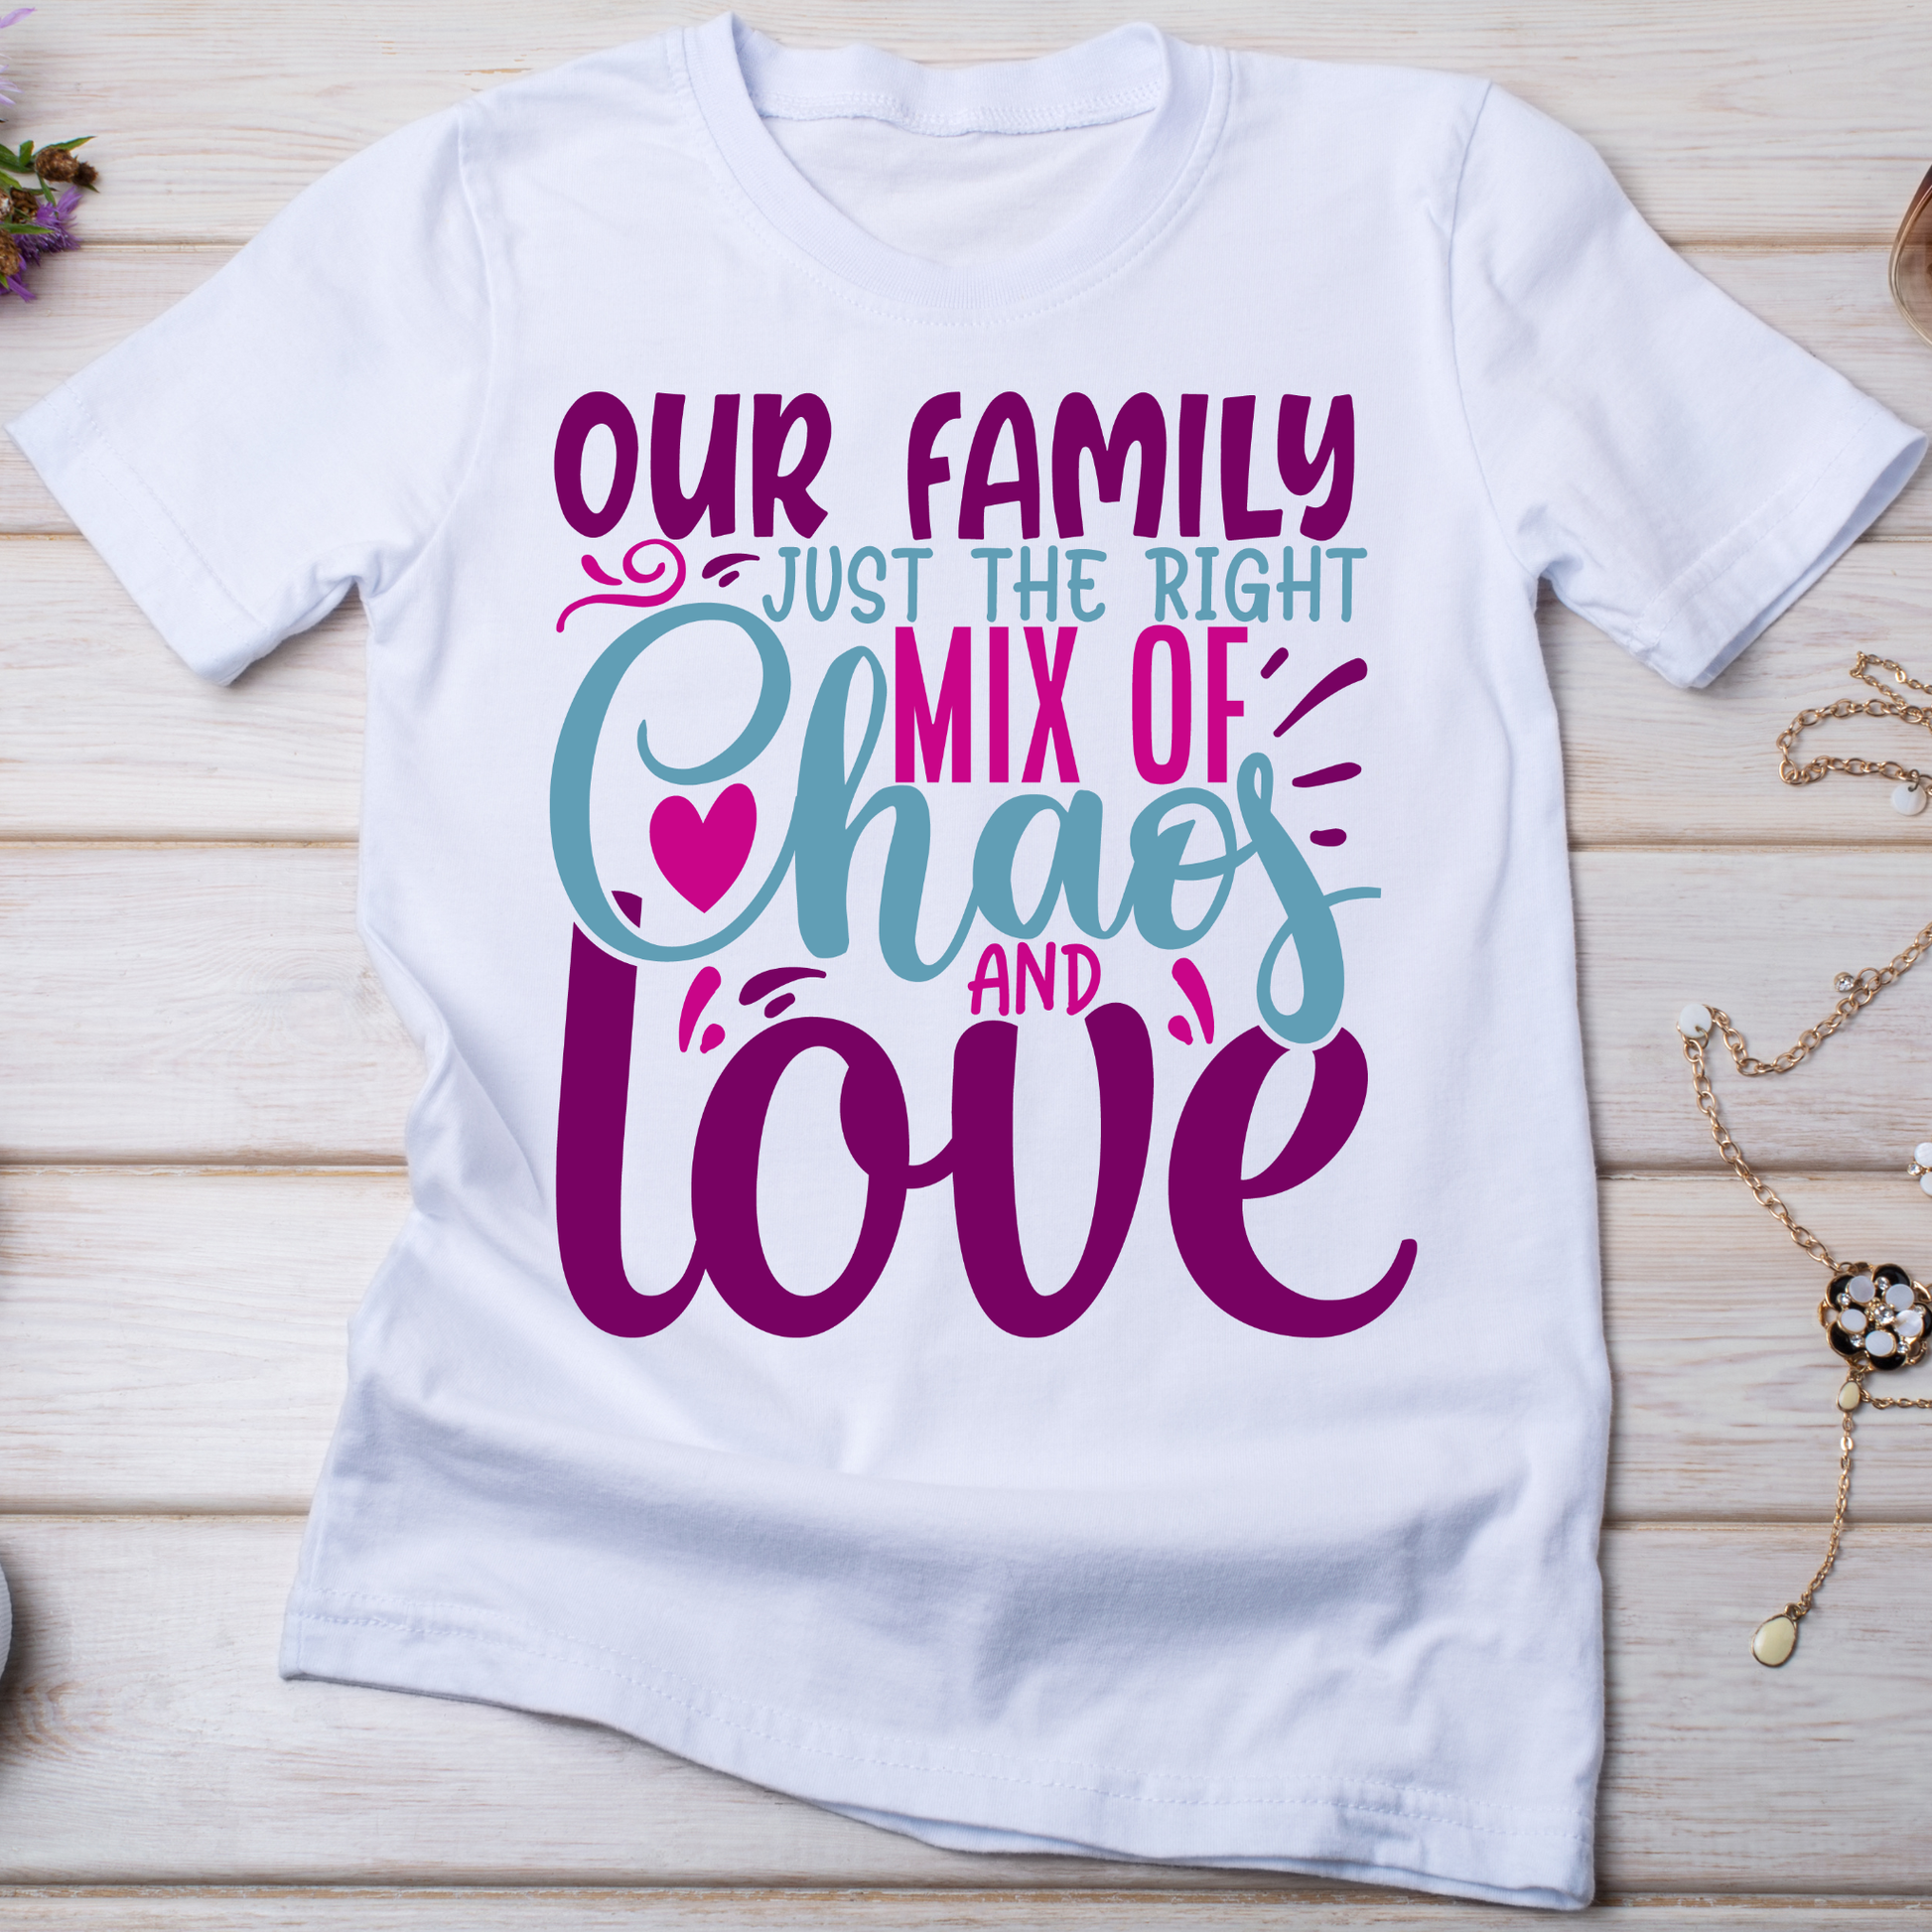 Our family just the right mix of chaos and love - trendy Women's t shirt - Premium t-shirt from Lees Krazy Teez - Just $19.95! Shop now at Lees Krazy Teez